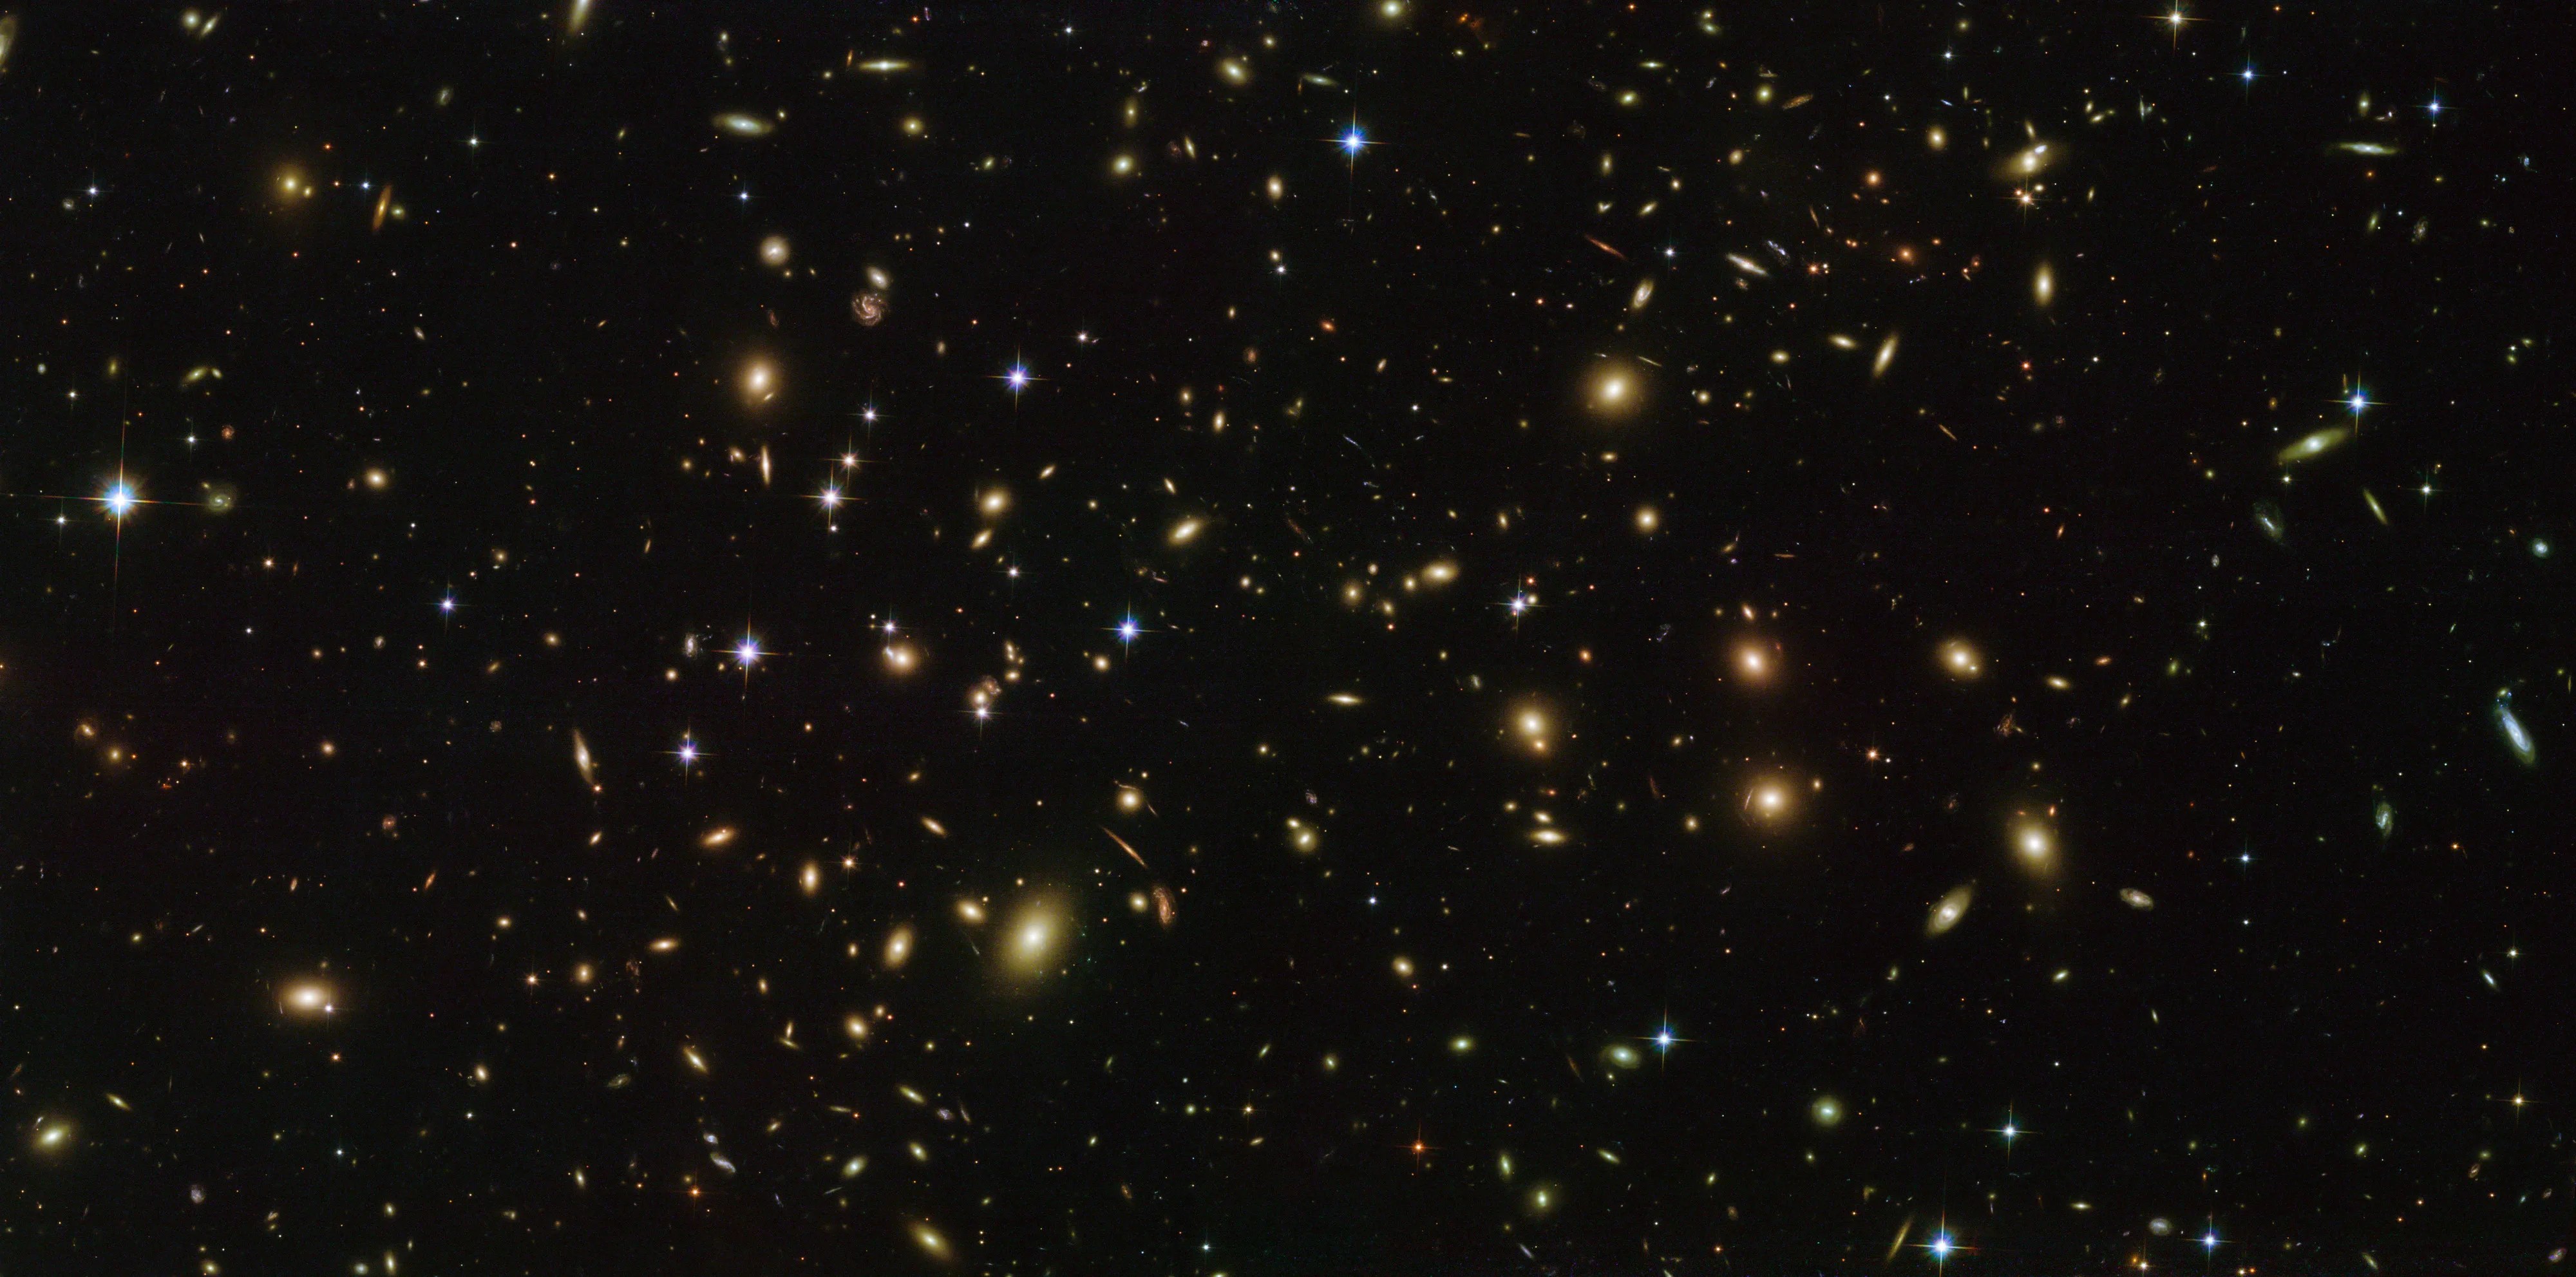 Field of stars and galaxies